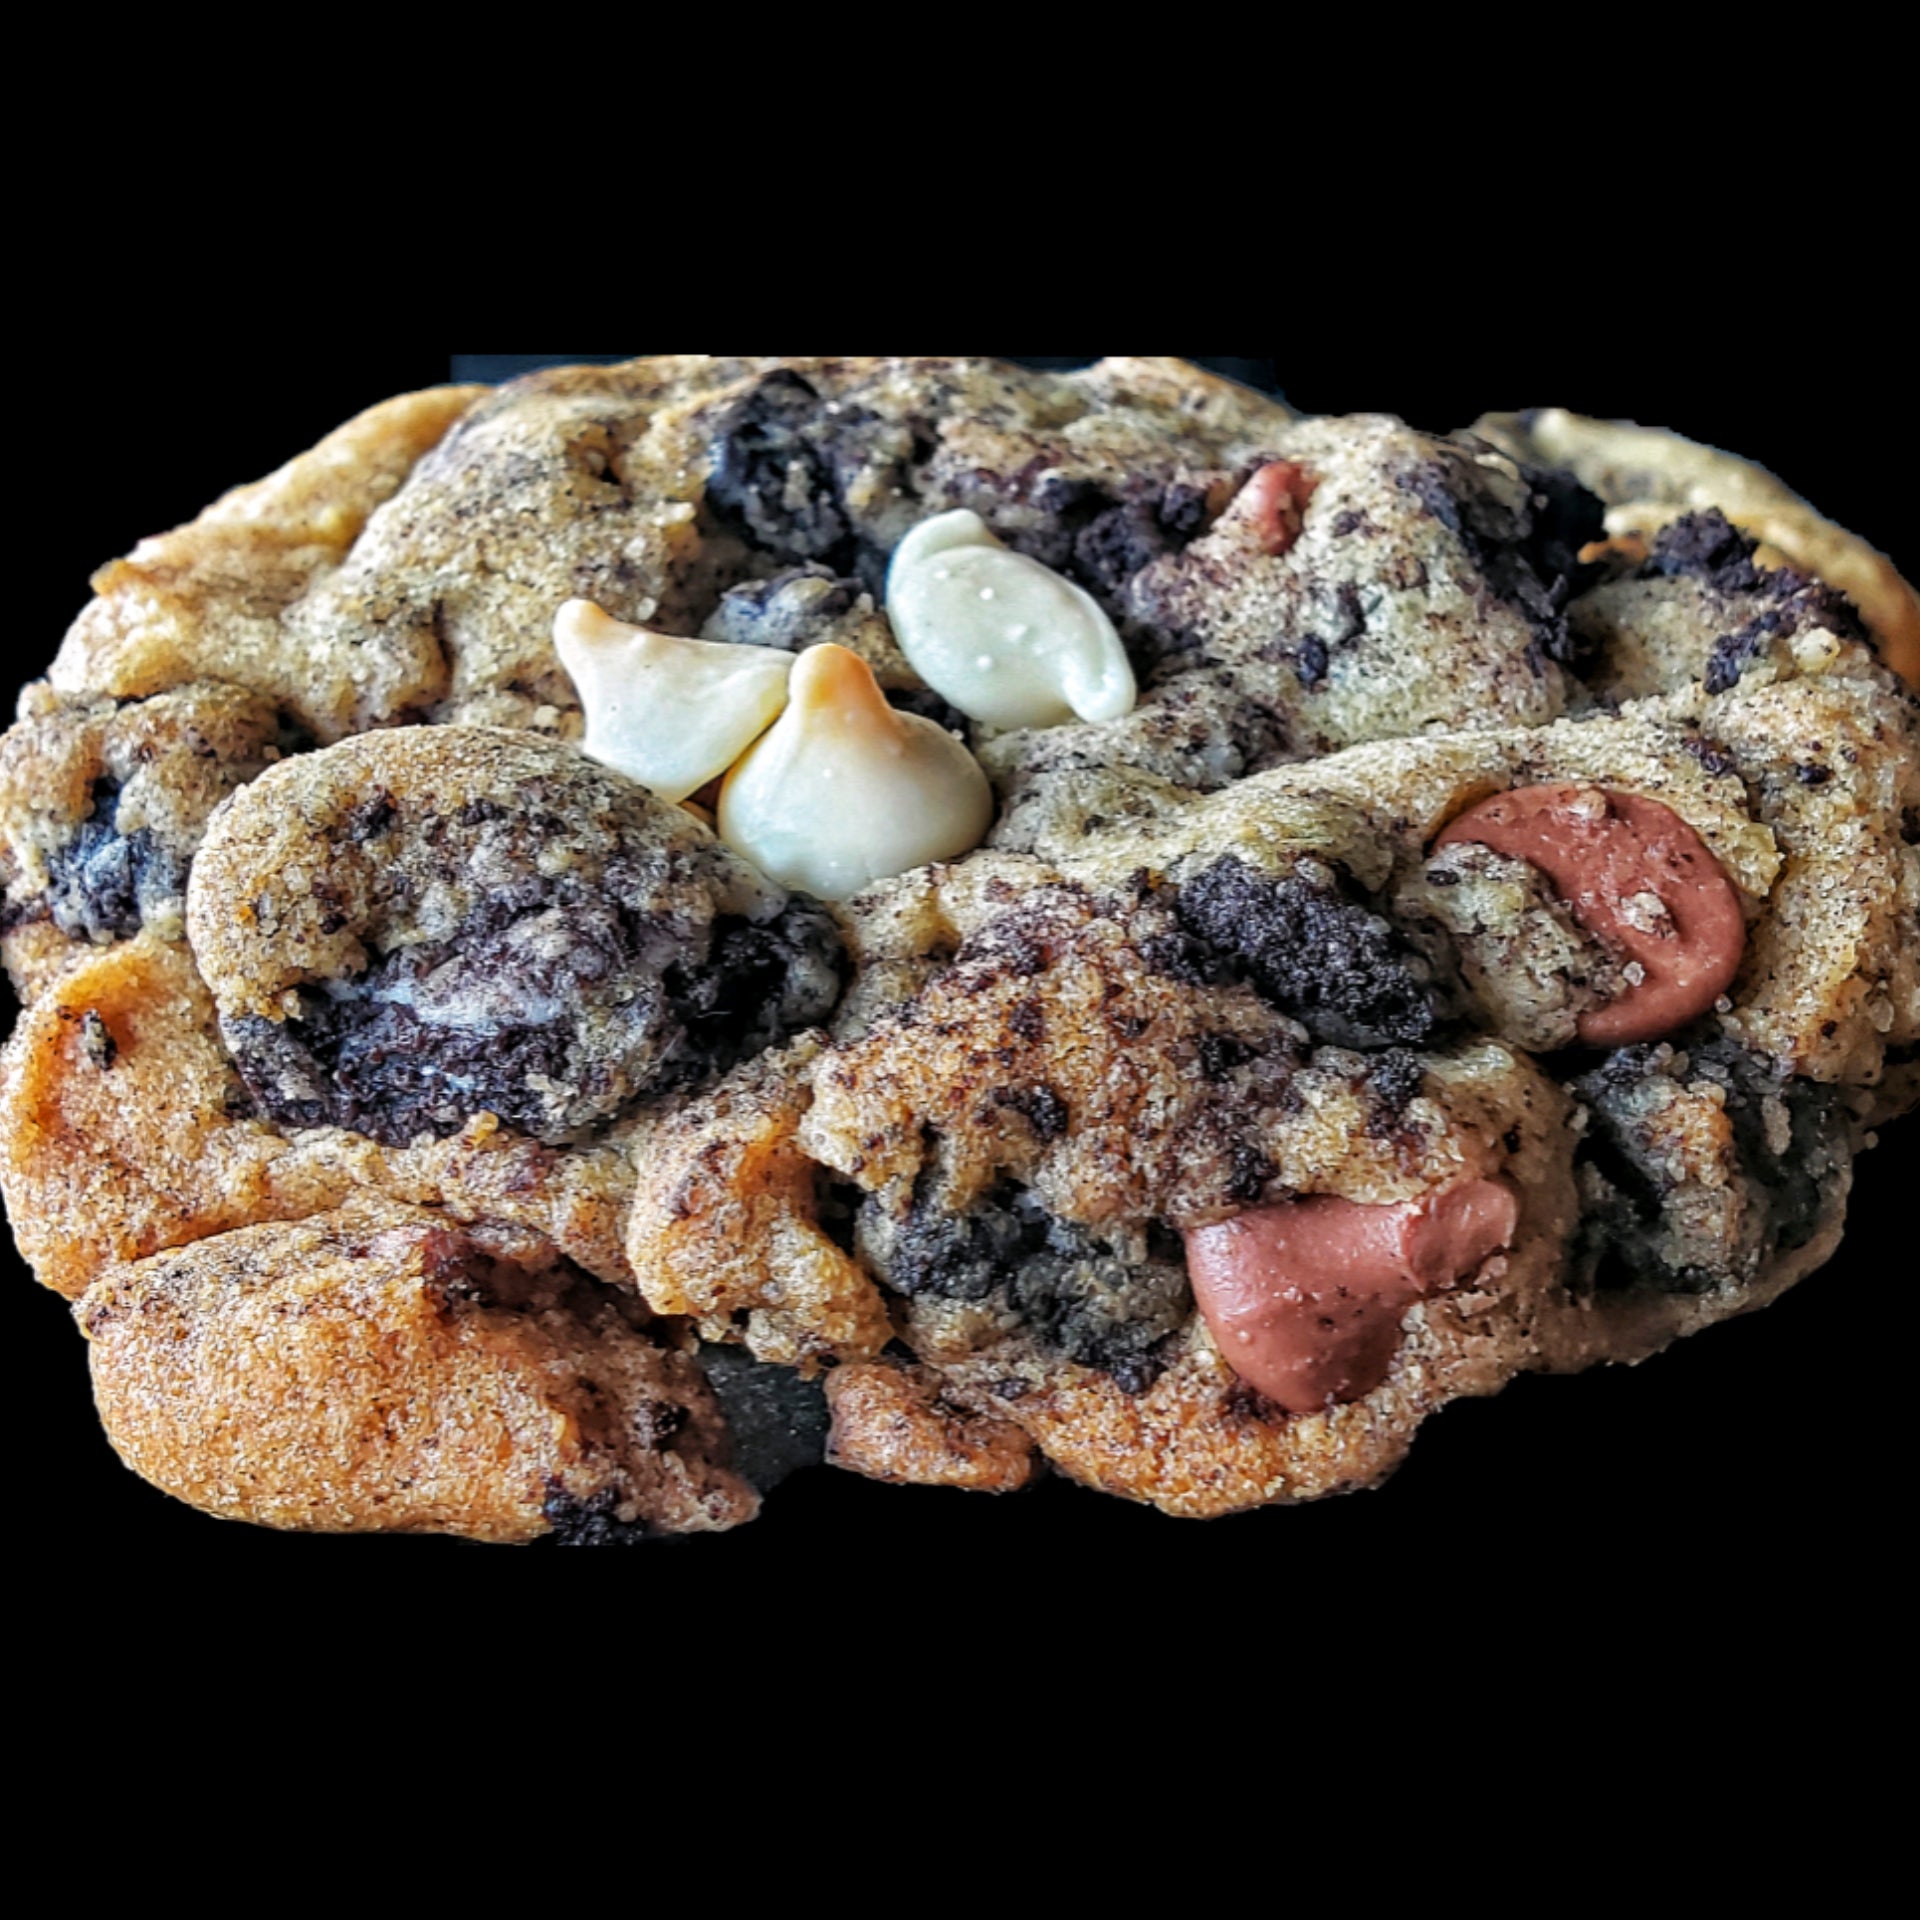 2 POUNDS OF DOUBLE TROUBLE COOKIES - A Gift for Yourself! (Bakery Box)